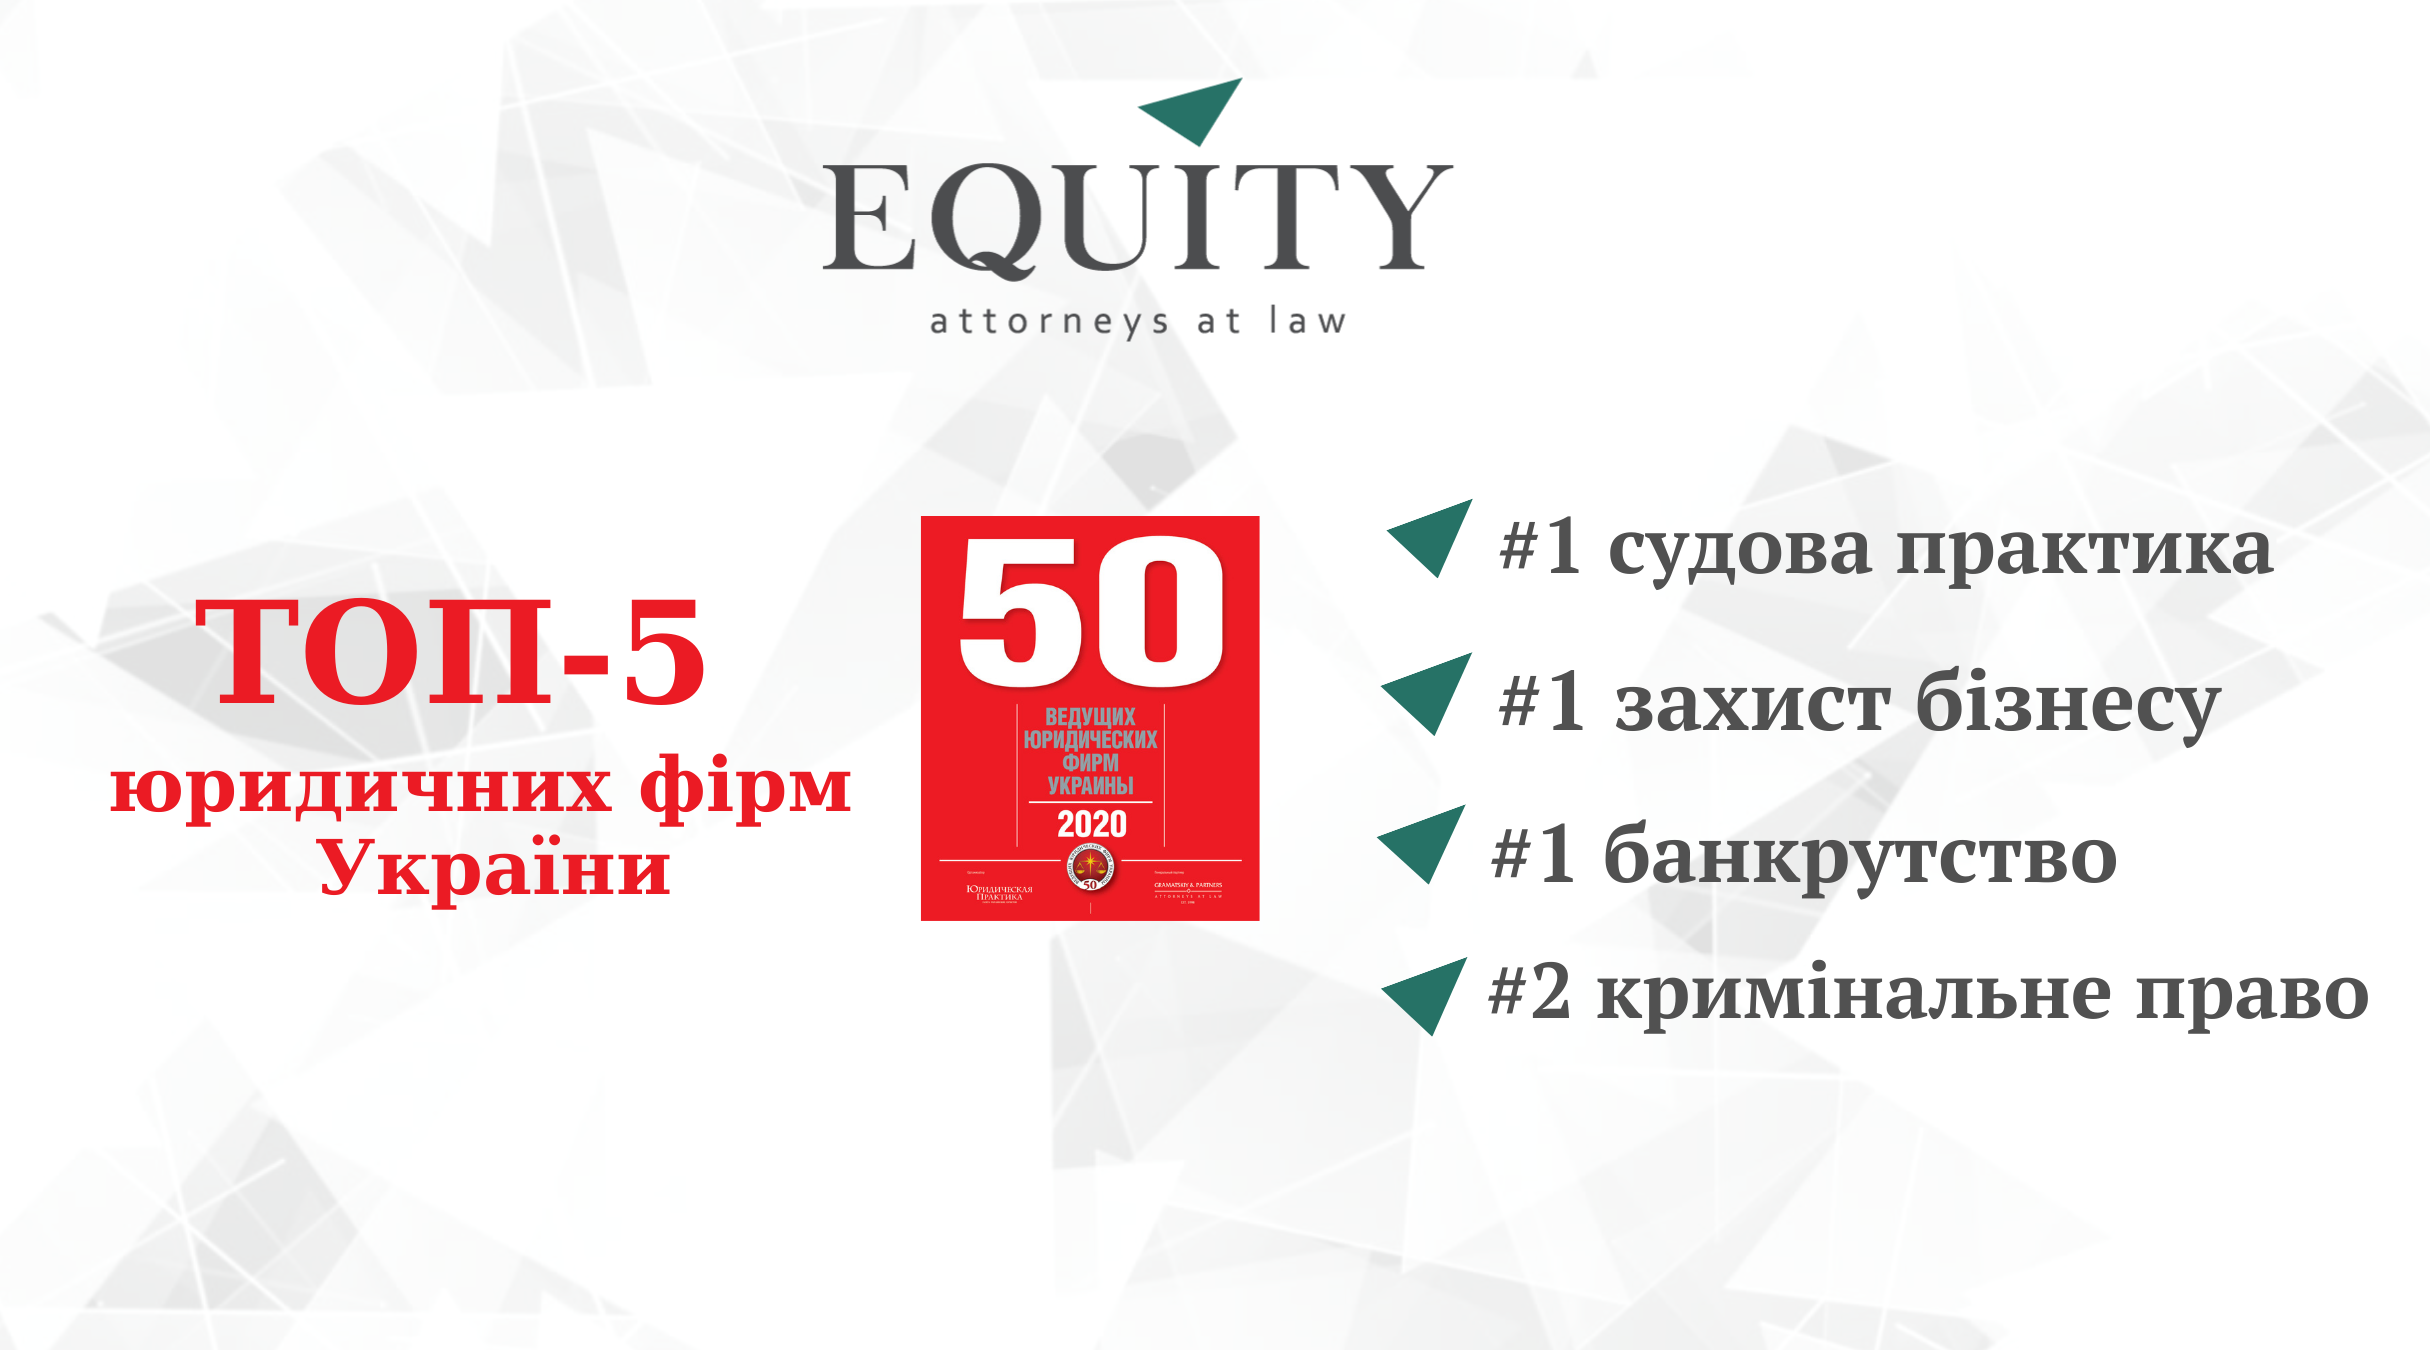 EQUITY is in The TOP-5 leading law firms of Ukraine!